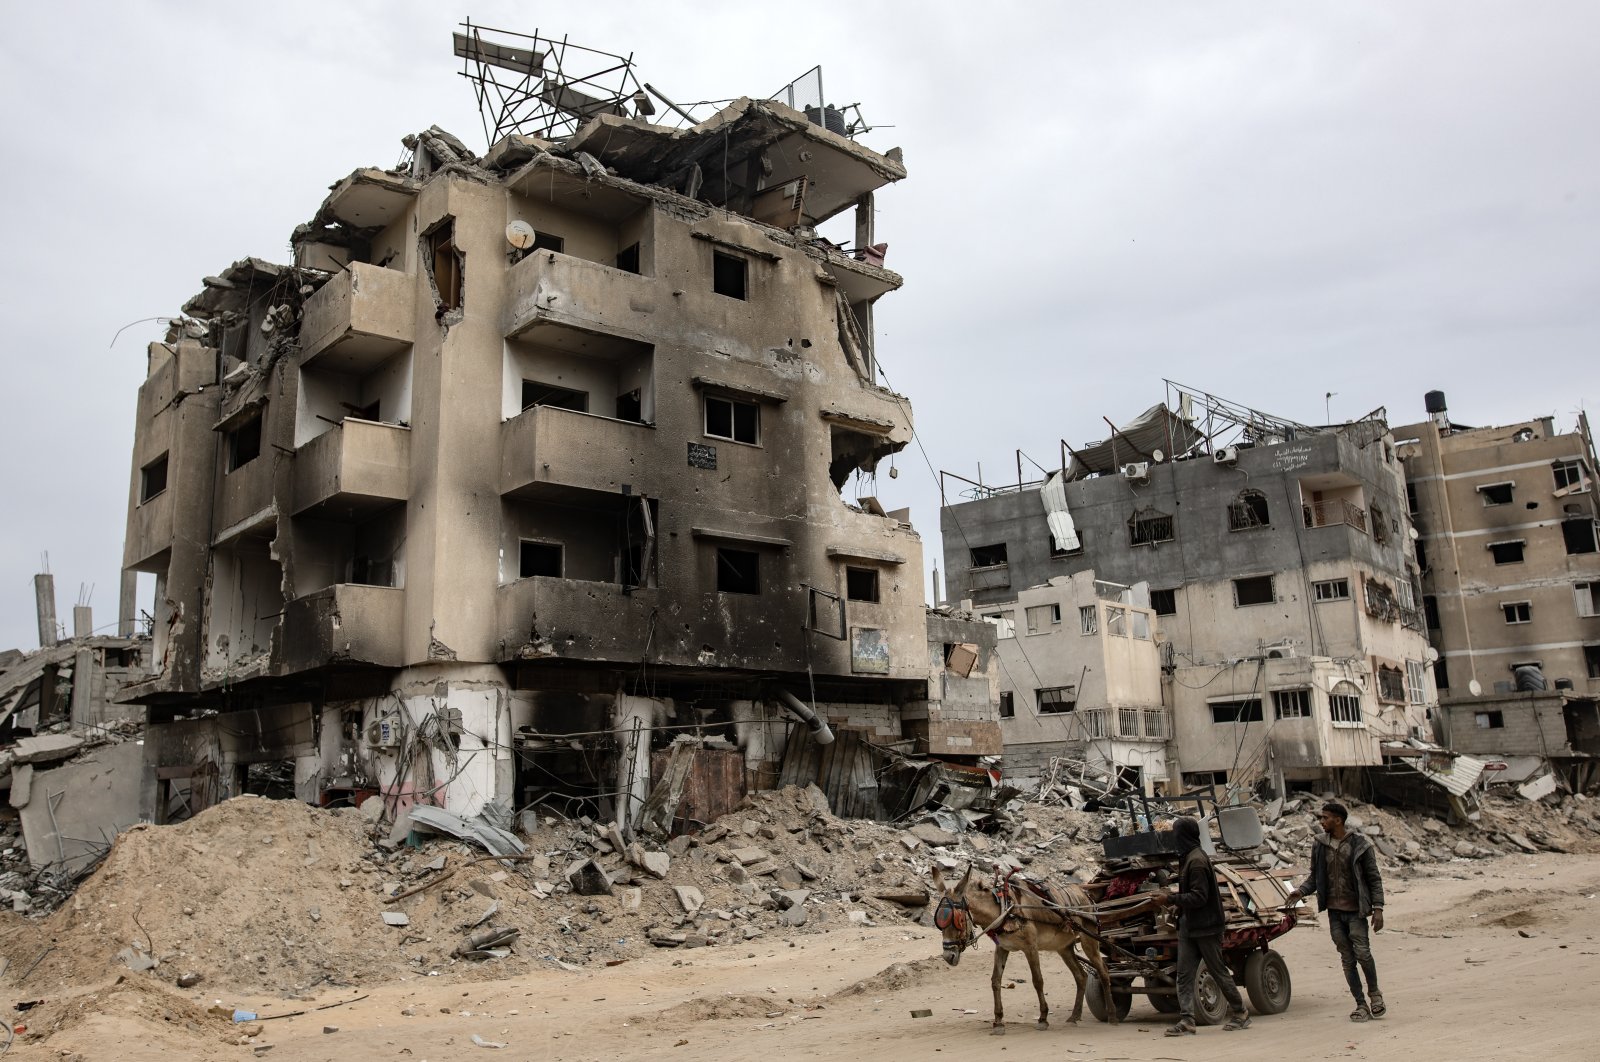 Palestinians drive a cart past destroyed buildings in Khan Younis after Israel pulled its ground forces out, Gaza Strip, Palestine, April 8, 2024. (EPA Photo)